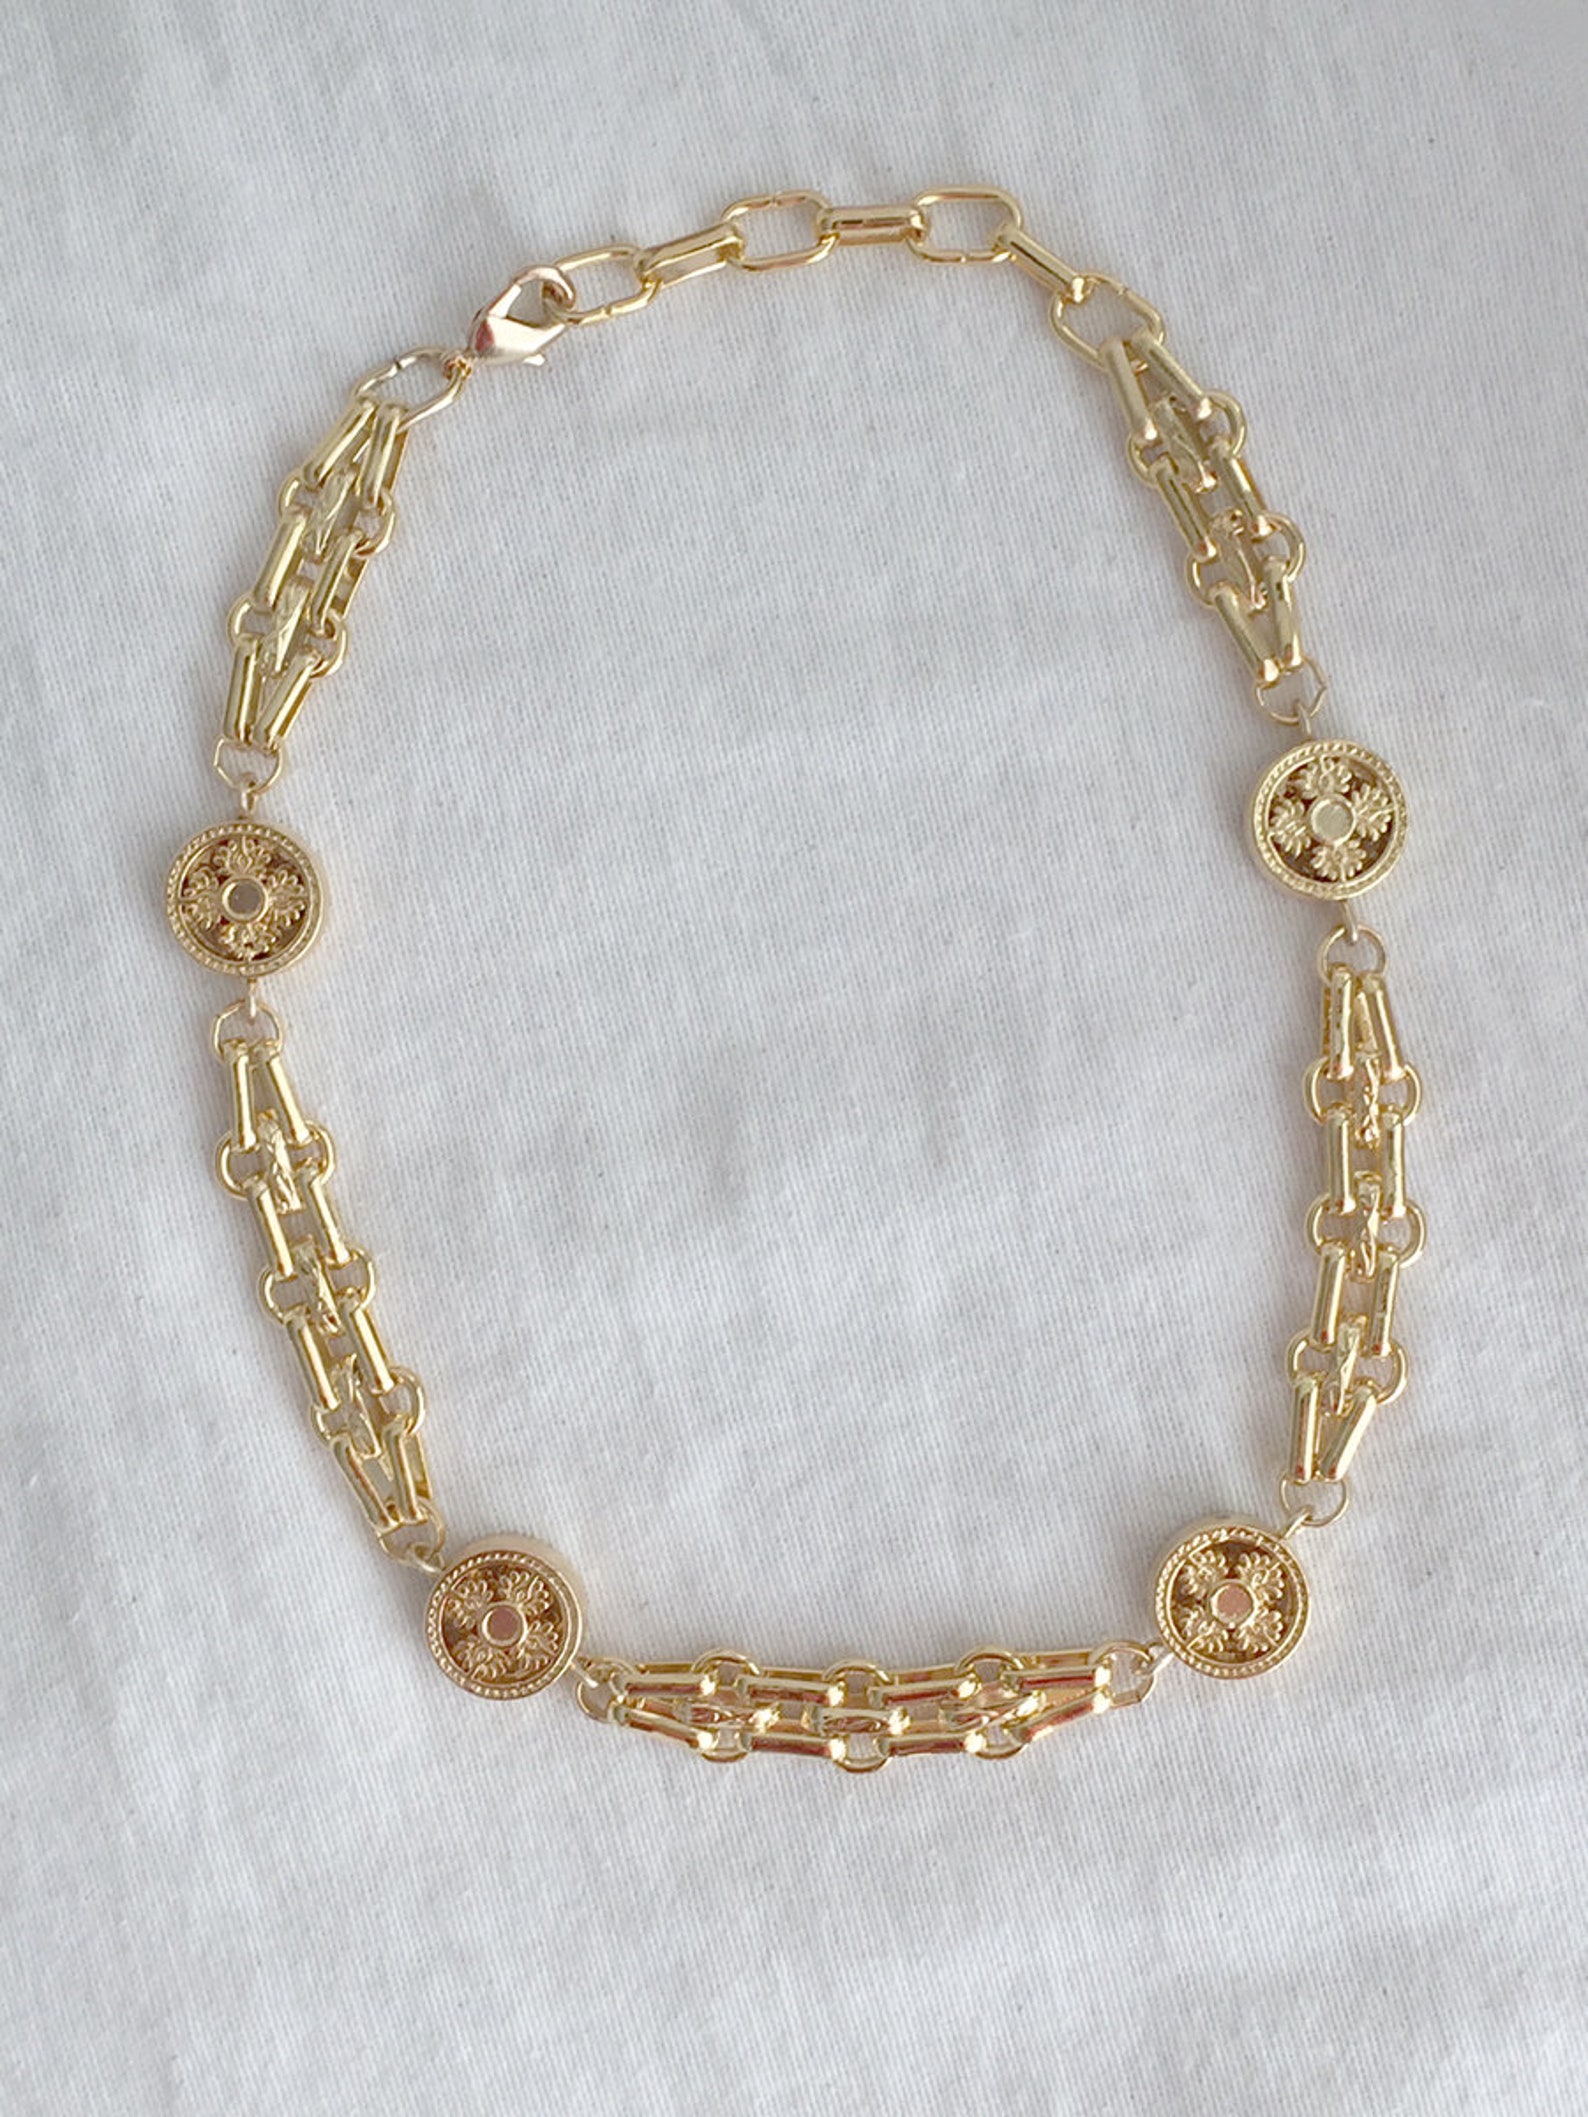 Gold Choker Wide Gold Necklace Statement Gold Choker Gold Link - Etsy